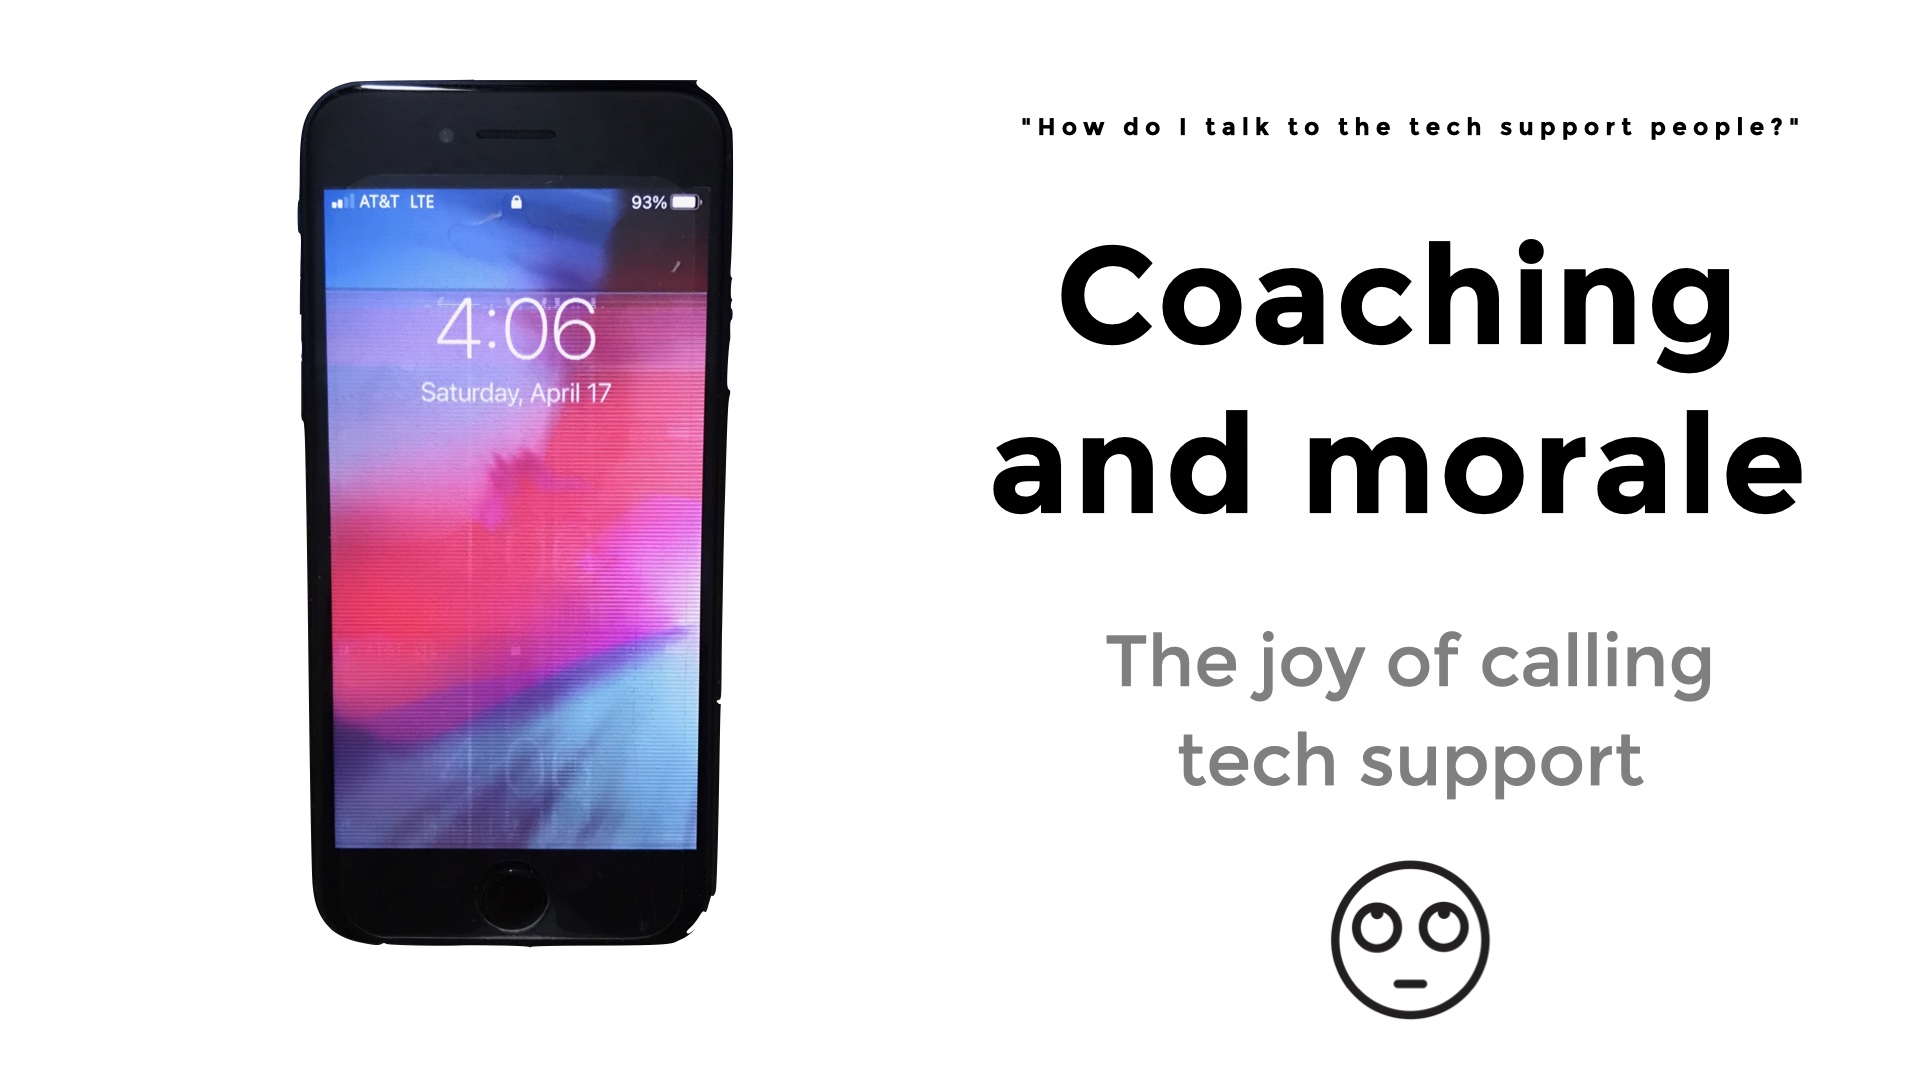 Image of iPhone with screen that is all pixellated and clearly broken. Text: Coaching and morale. Subtitle: The joy of calling 
tech support